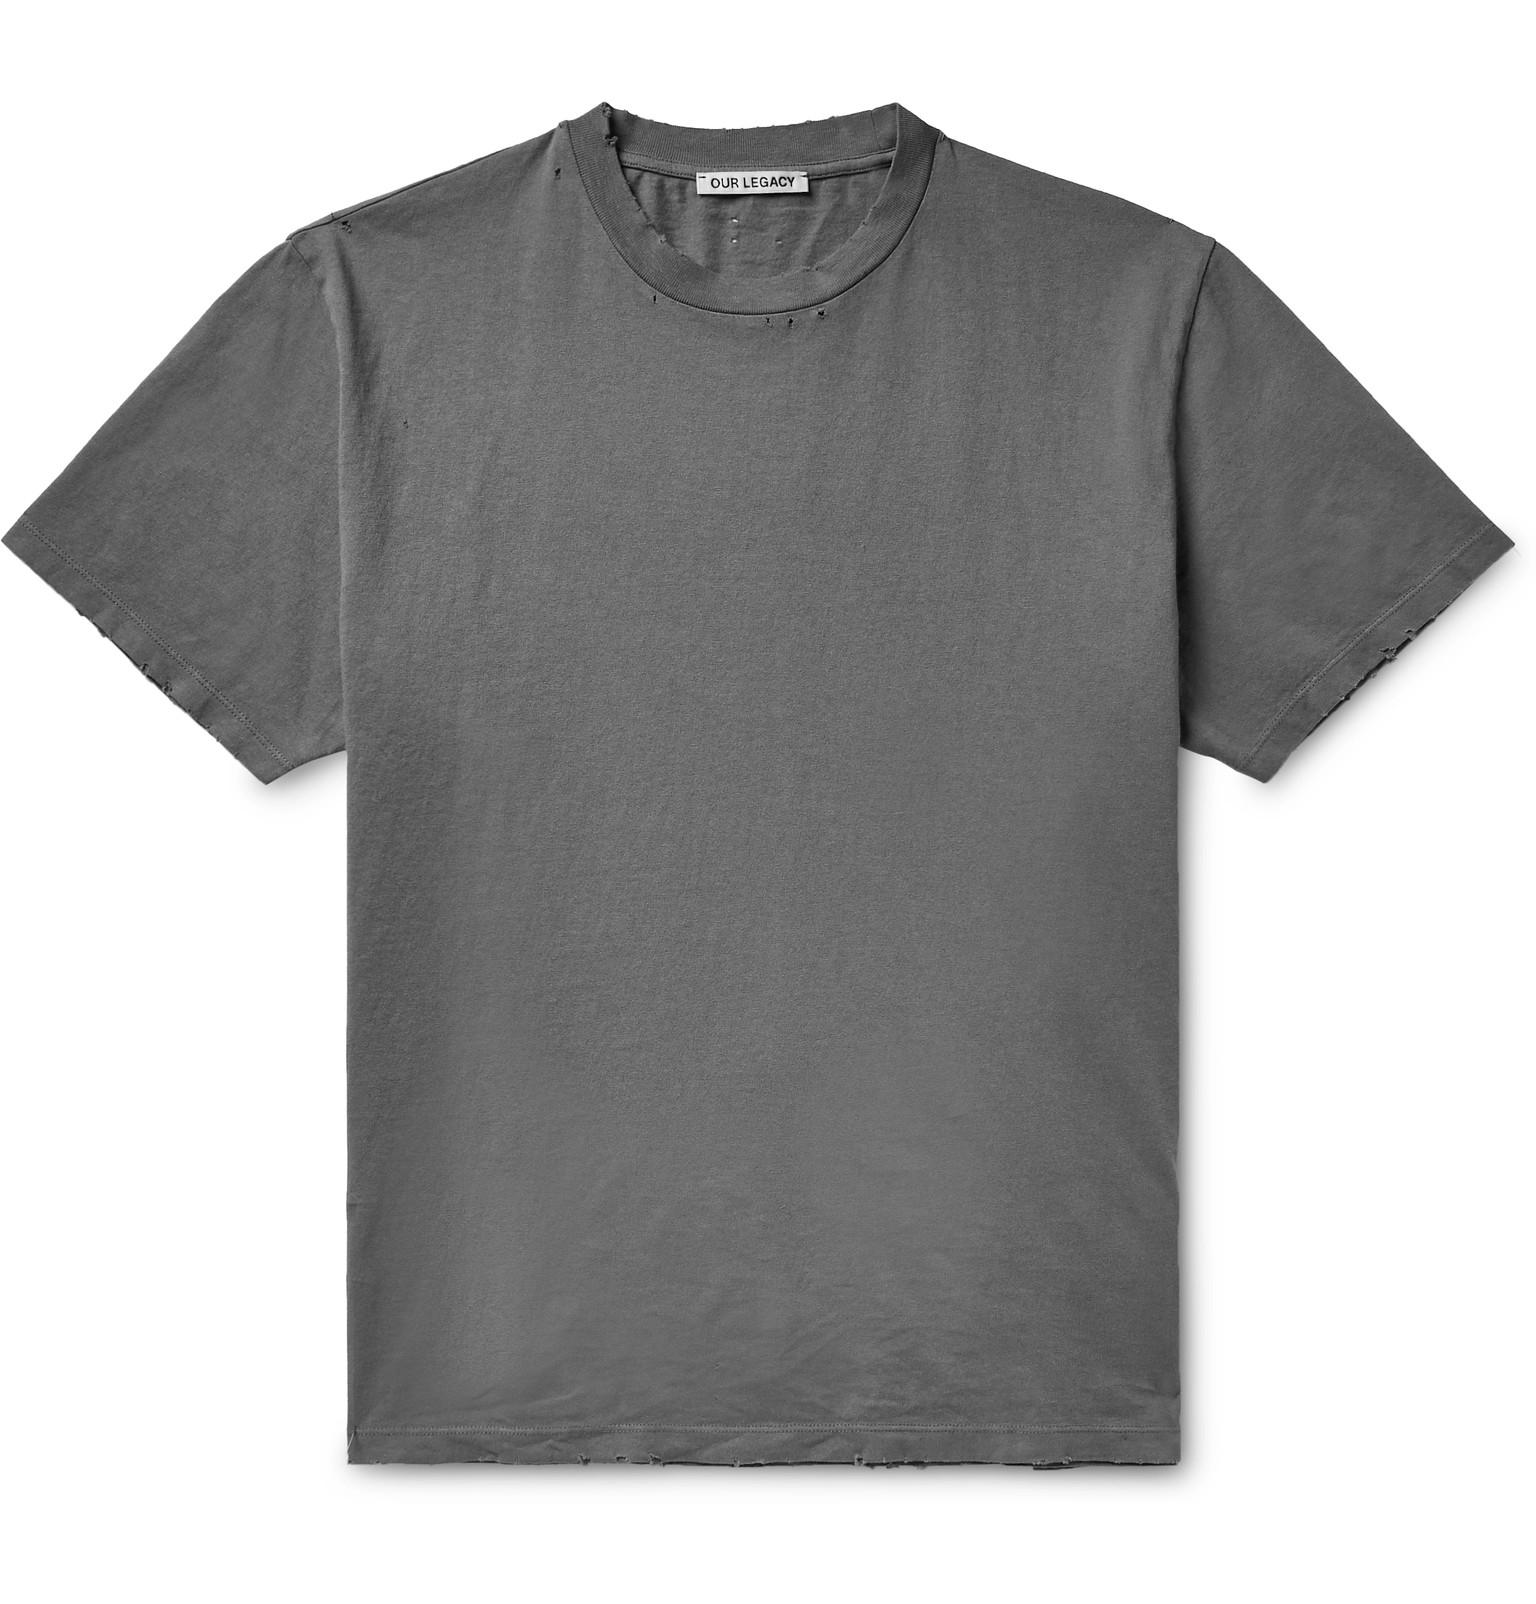 Lyst Our Legacy Distressed Cottonjersey Tshirt in Gray for Men